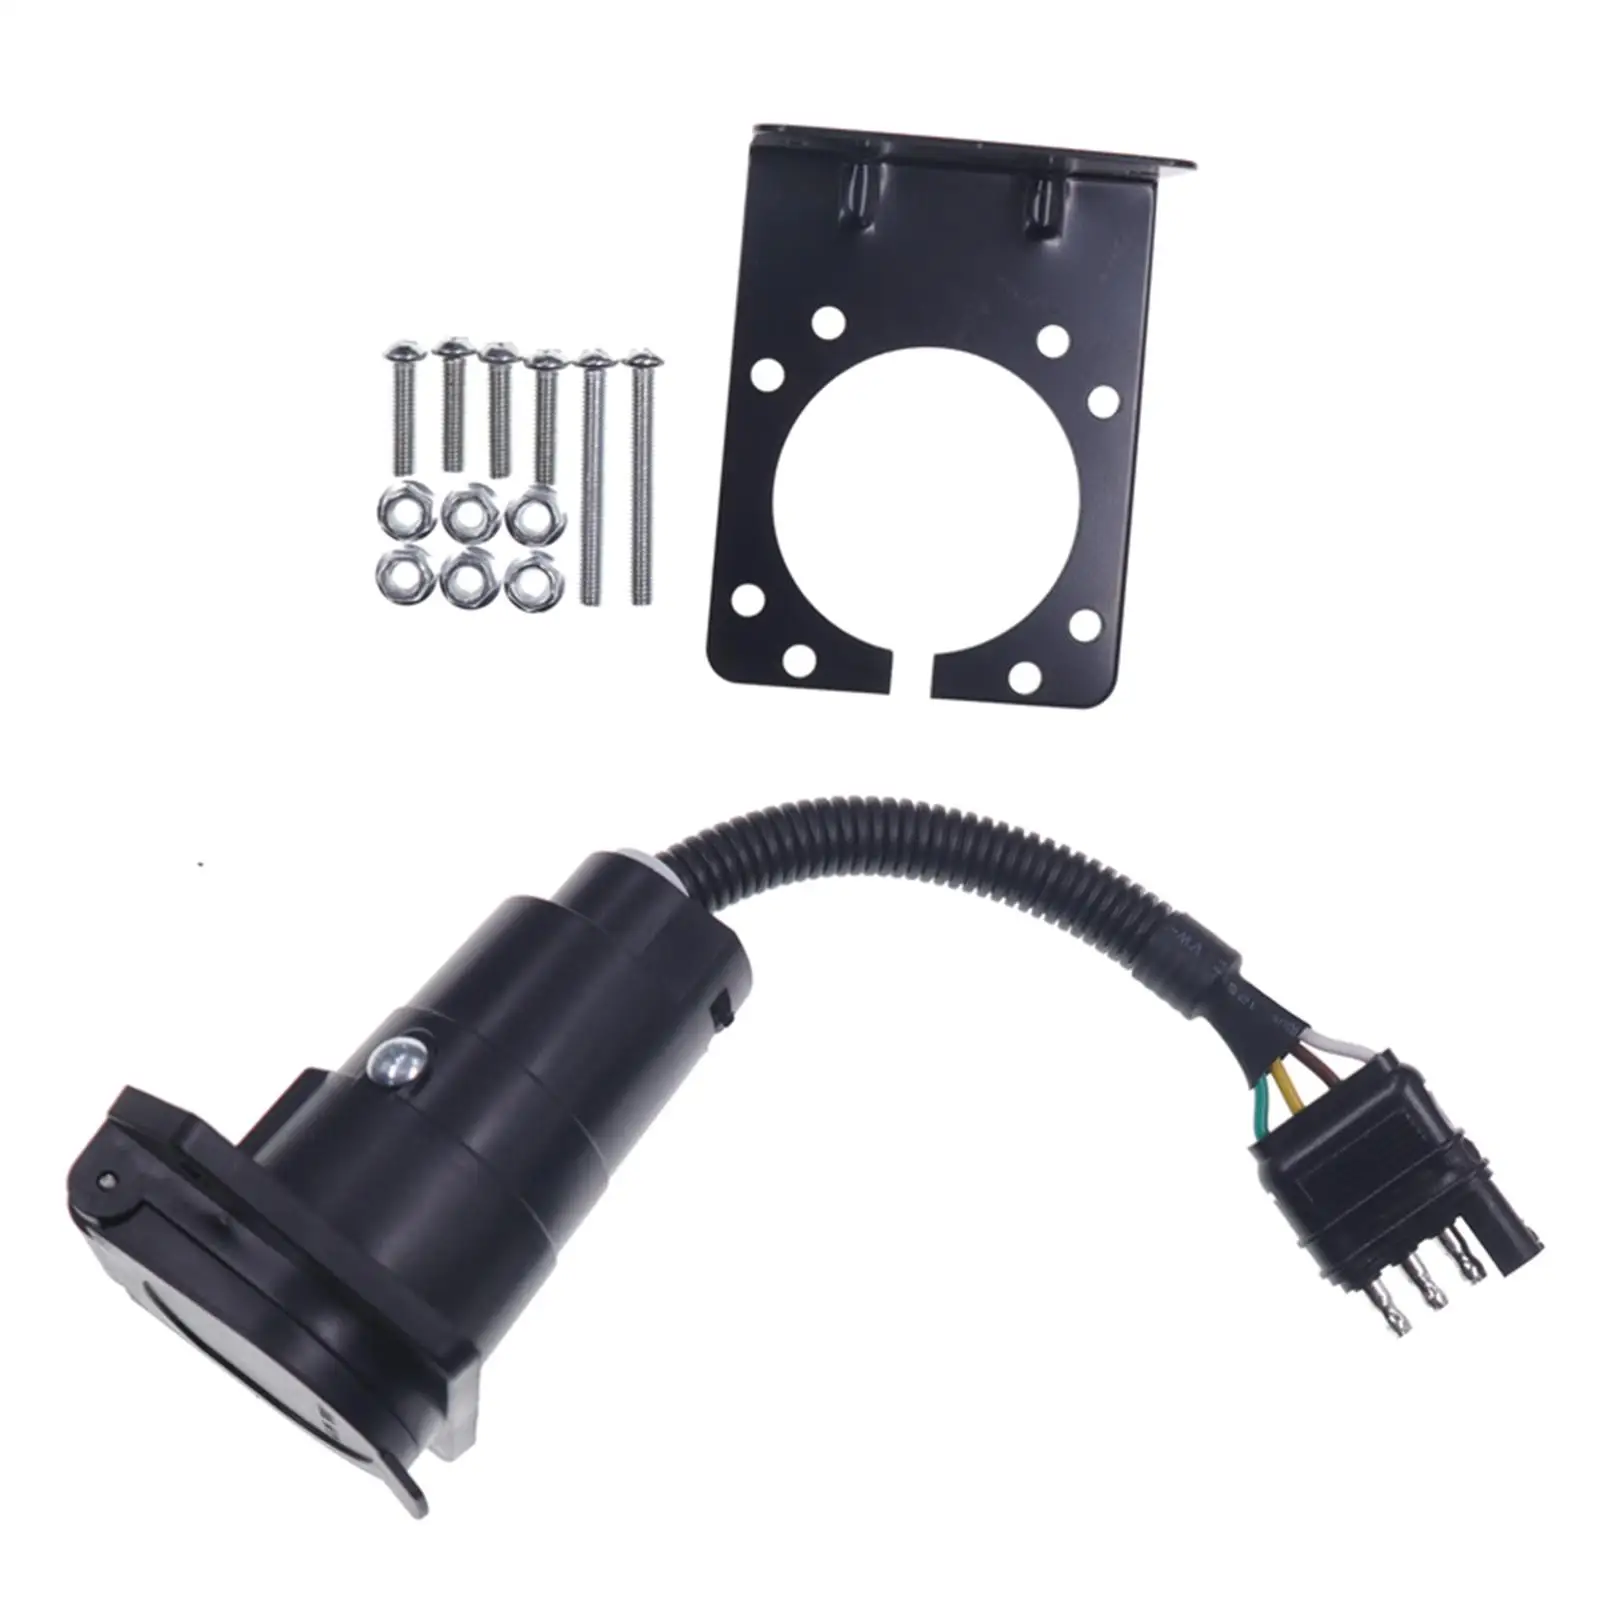 Durable Trailer Adapter Plug 4 Pin to 7 Pin Wiring Harness for Towing Solutions Caravans Vehicles Repair Modification